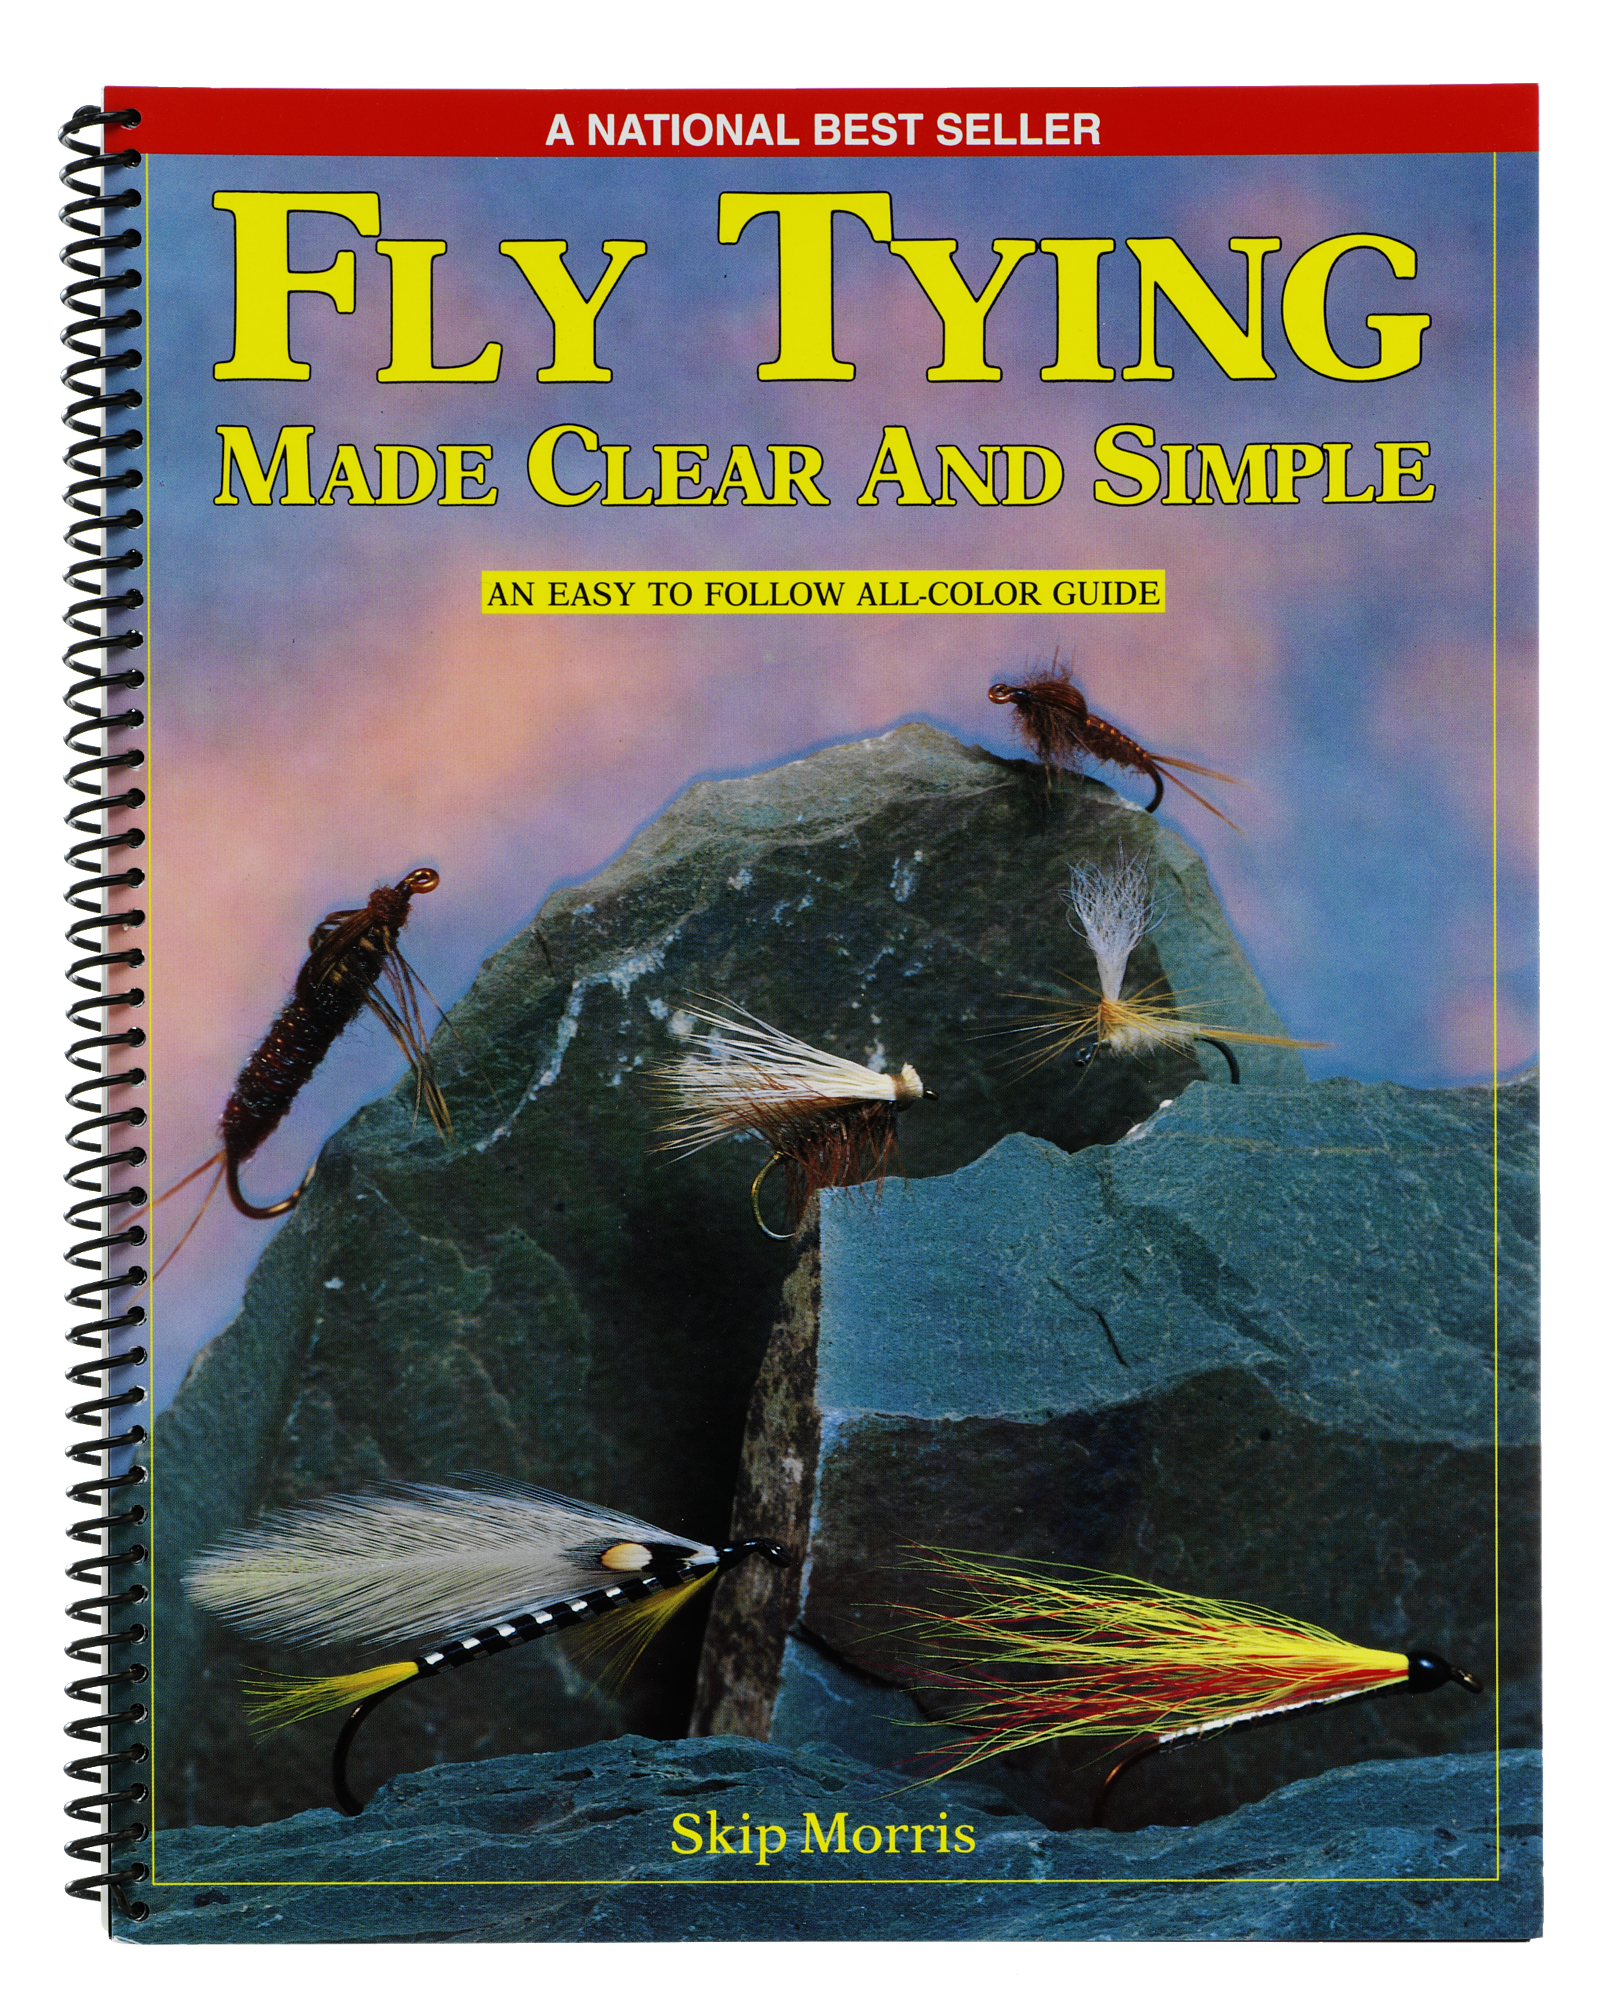 Fly Tying Made Clear and Simple Book by Skip Morris